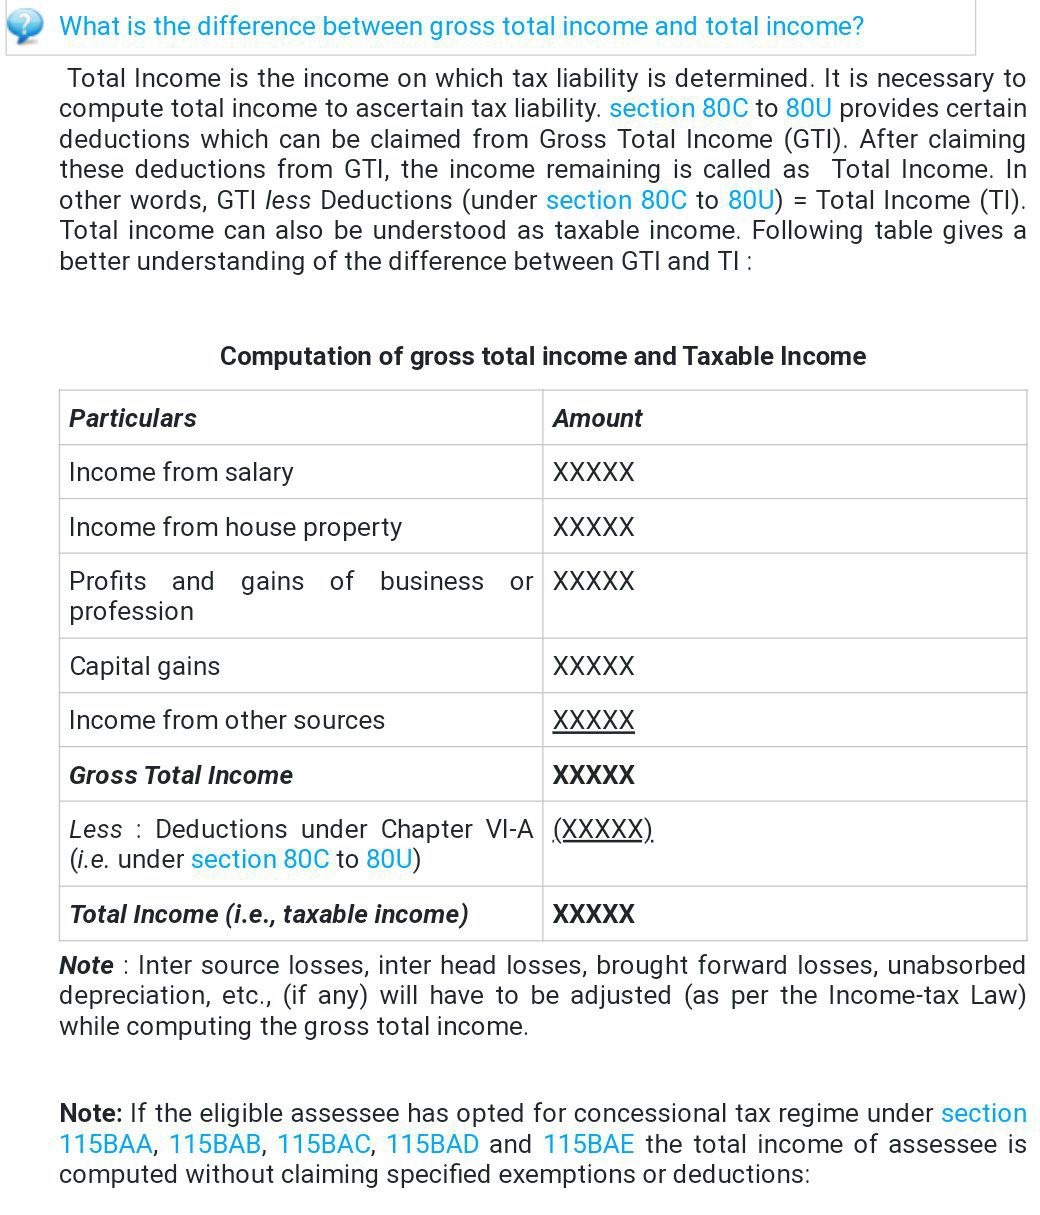 Difference between Gross Total Income and Total Income